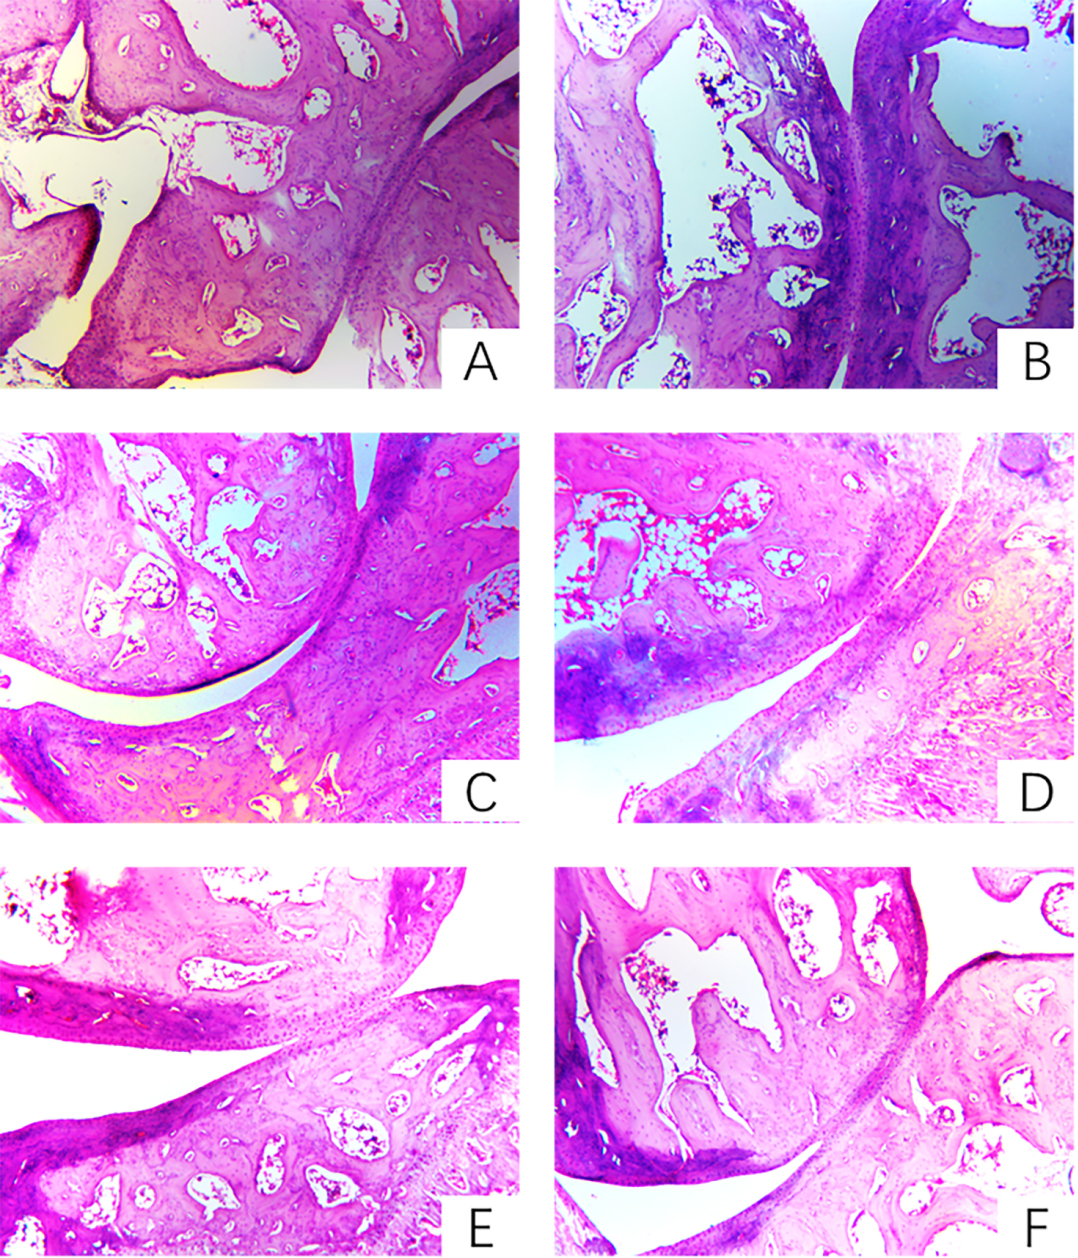 The influence of PTTTF on knee joint histopathology in rats with adjuvant arthritis(HE stain, × 200) A: Control knee joint histopathology B: Histopathological manifestations of knee joints in AA rats C: Histopathological manifestations of knee joints in AA rats treated with DXM (0.125 mg/kg) D: Histopathological manifestations of knee joints in AA rats treated with PTTTF (50 mg/mL) E: Histopathological manifestations of knee joints in AA rats treated with PTTTF (100 mg/mL) F: Histopathological manifestations of knee joints in AA rats treated with PTTTF (200 mg/mL)